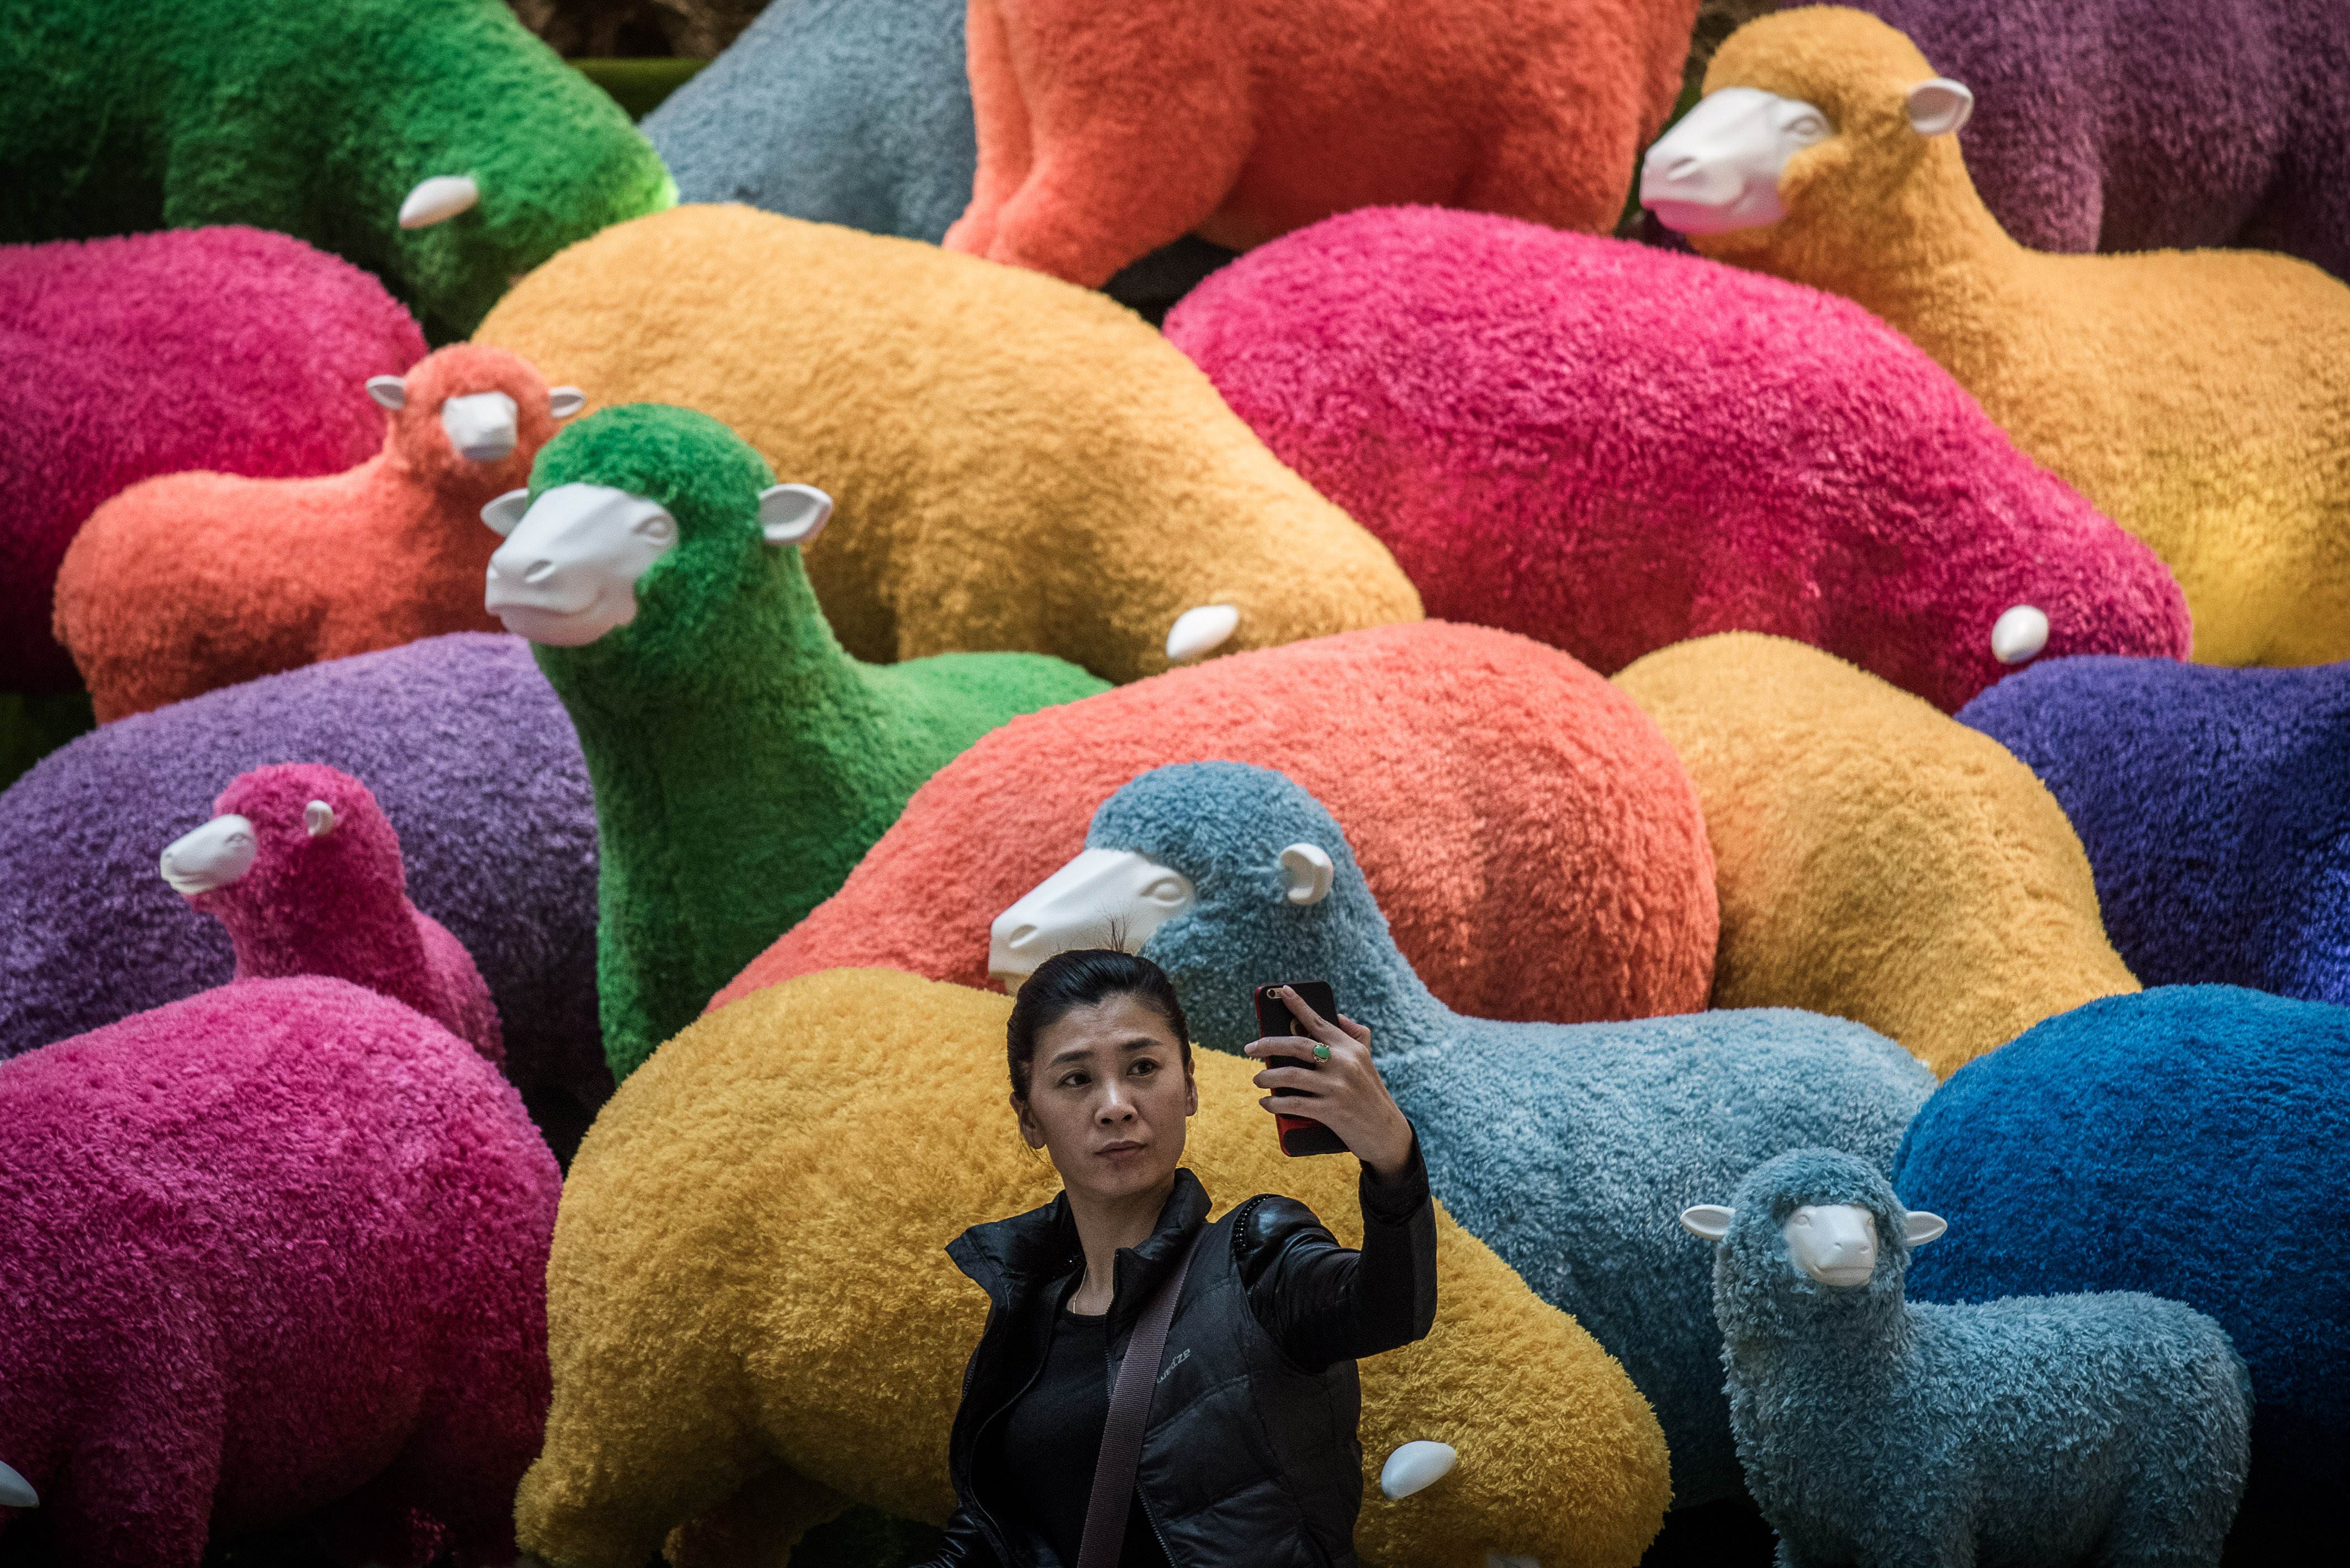 Hong Kong people may behave more like cats than sheep, going off in different directions. Photo: AFP